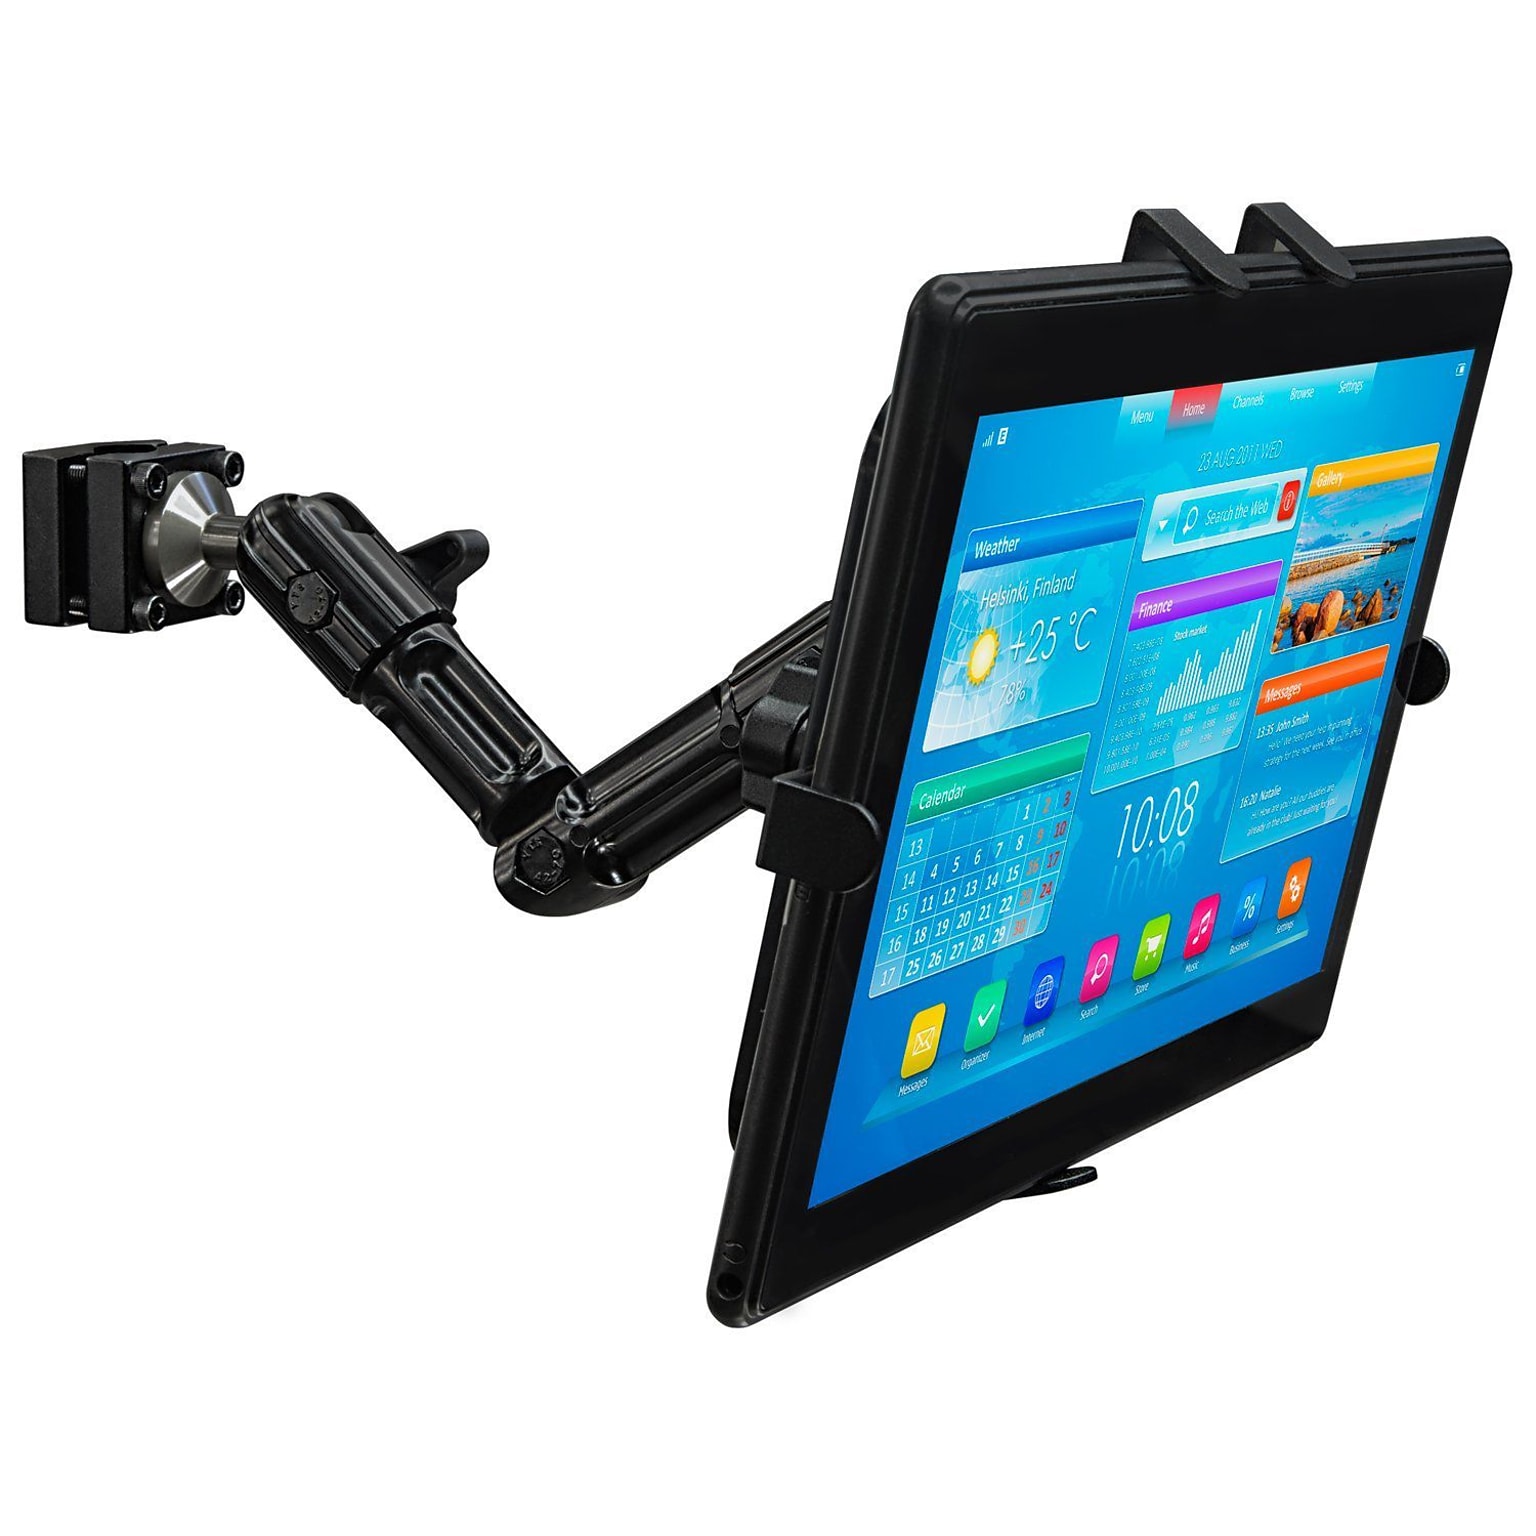 Mount-It! Vehicle Headrest Tablet Mount for iPad 2, 3, iPad Air, iPad Air 2, and 7 to 11 Tablets (MI-7310)